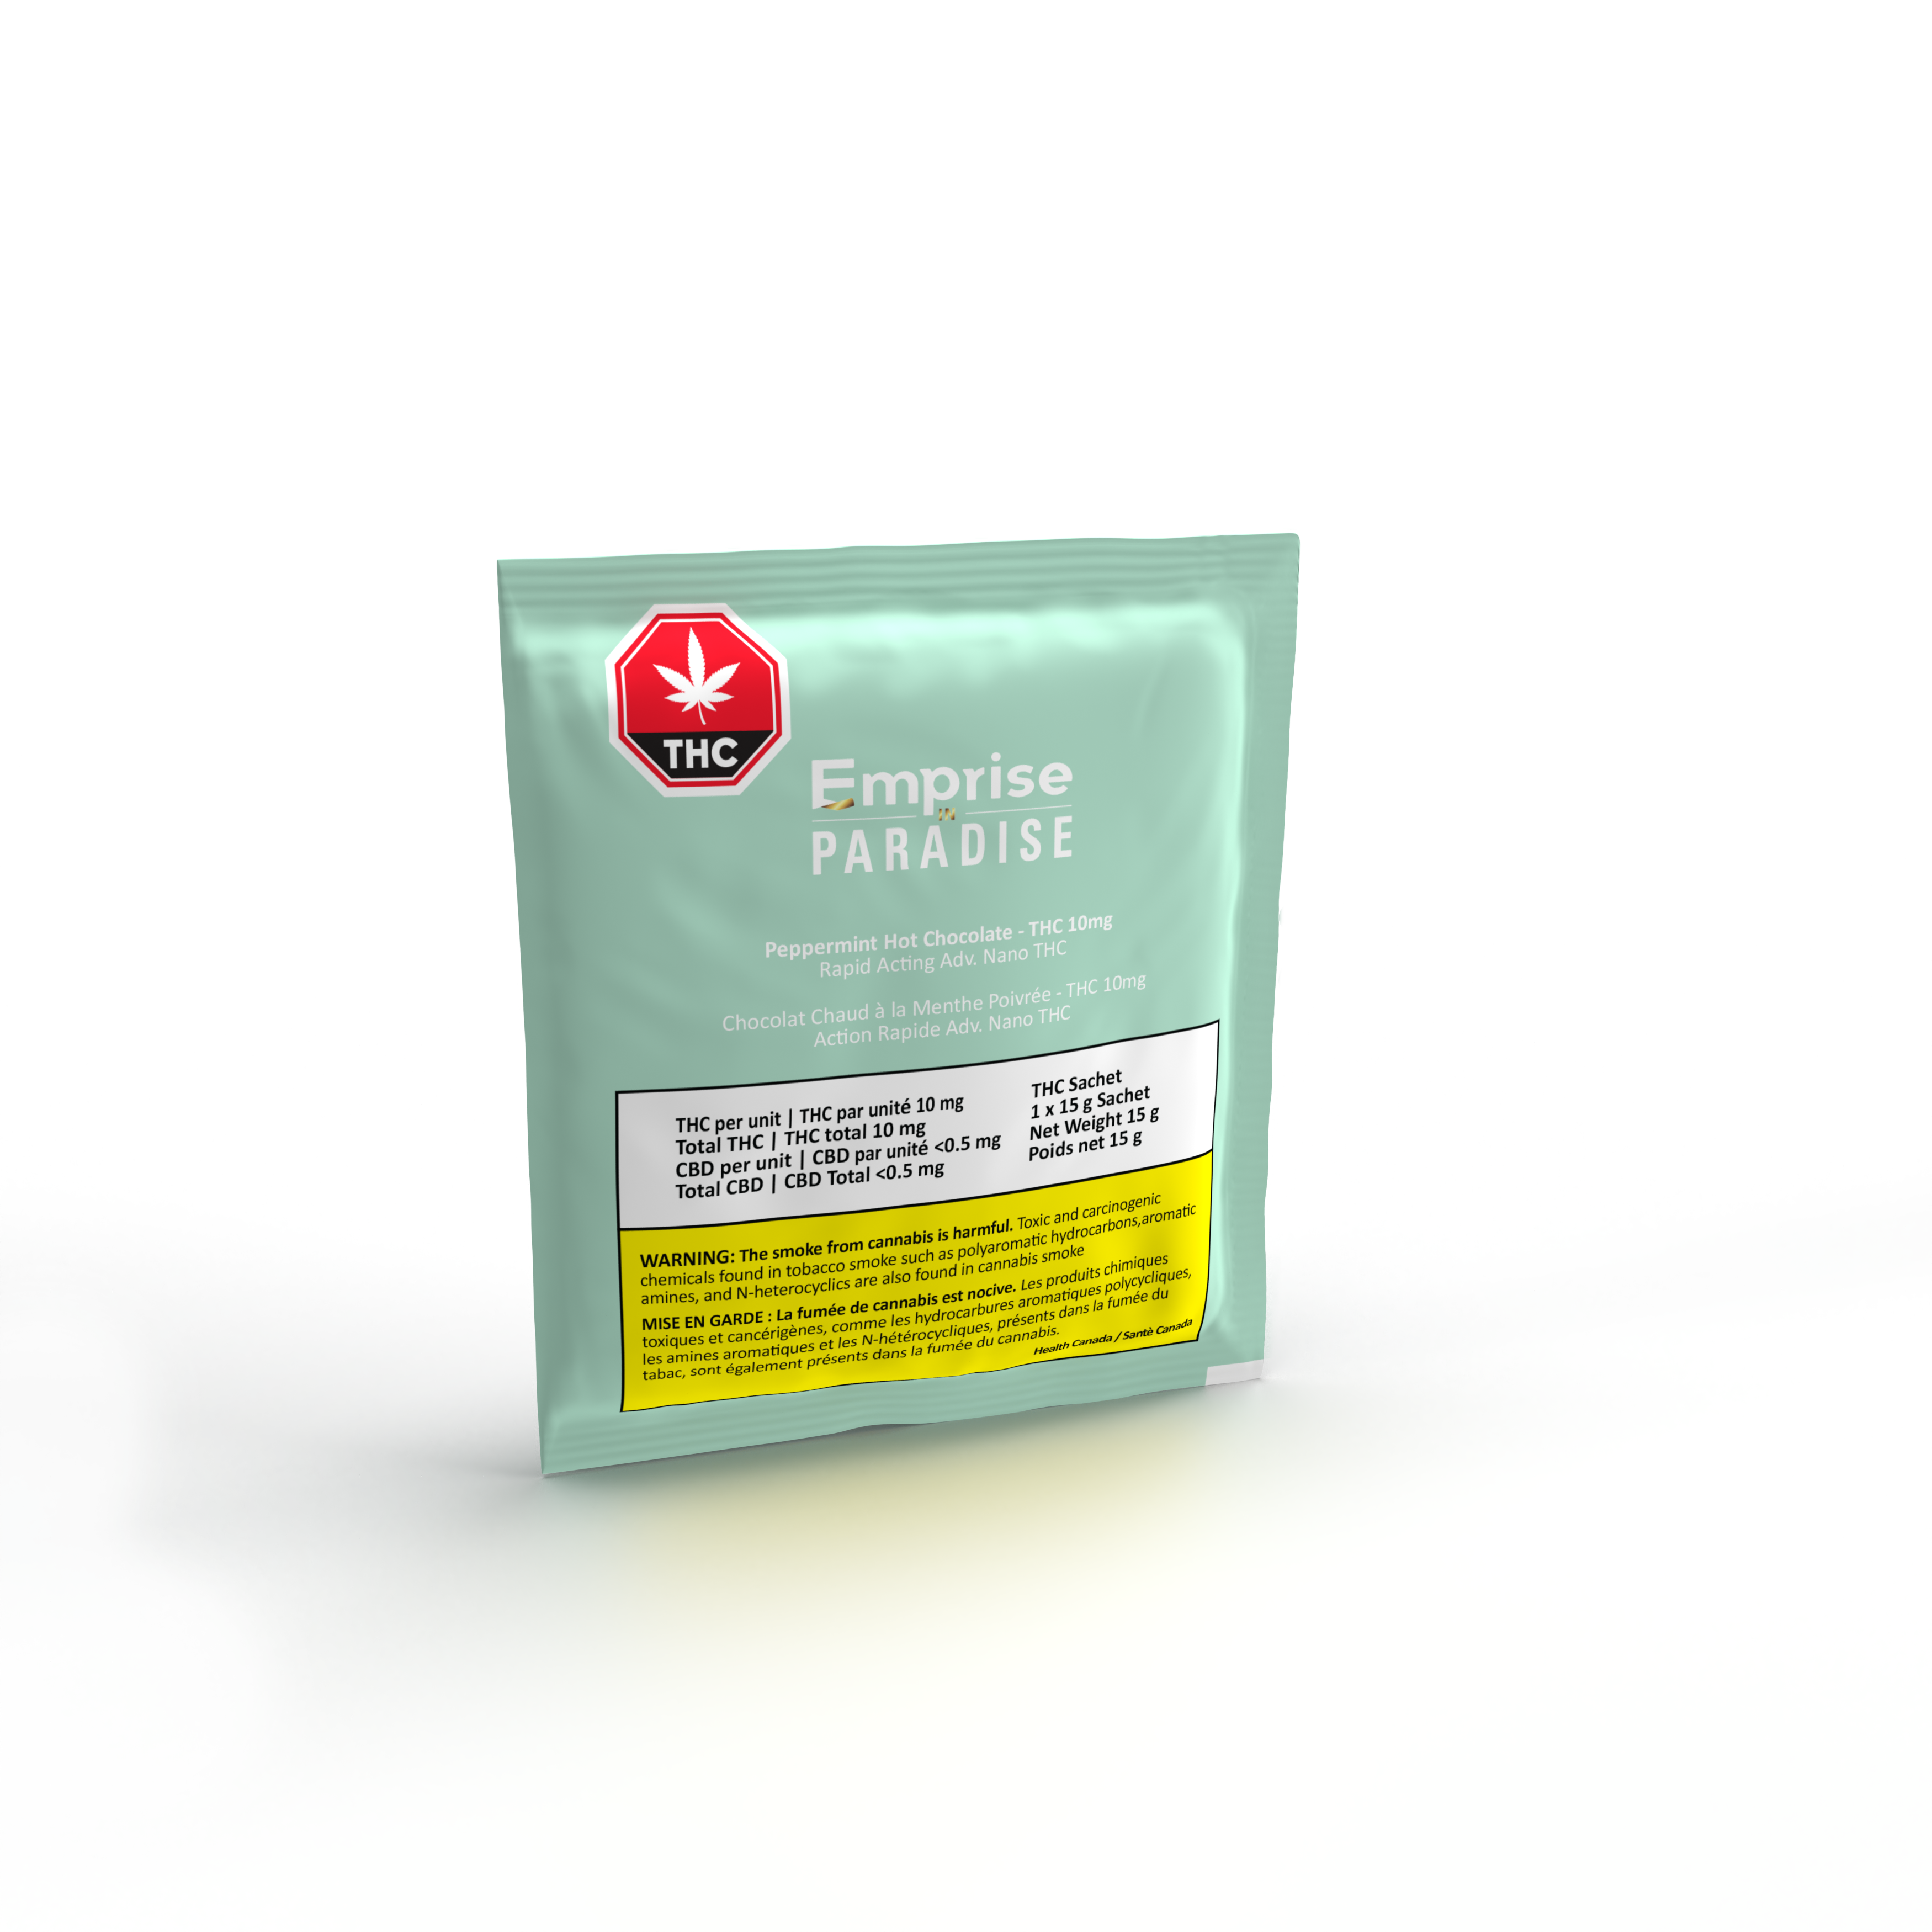 Cannabis Product Peppermint Vegan & Organic Hot Chocolate - 10mg Rapid Nano THC by Emprise in Paradise